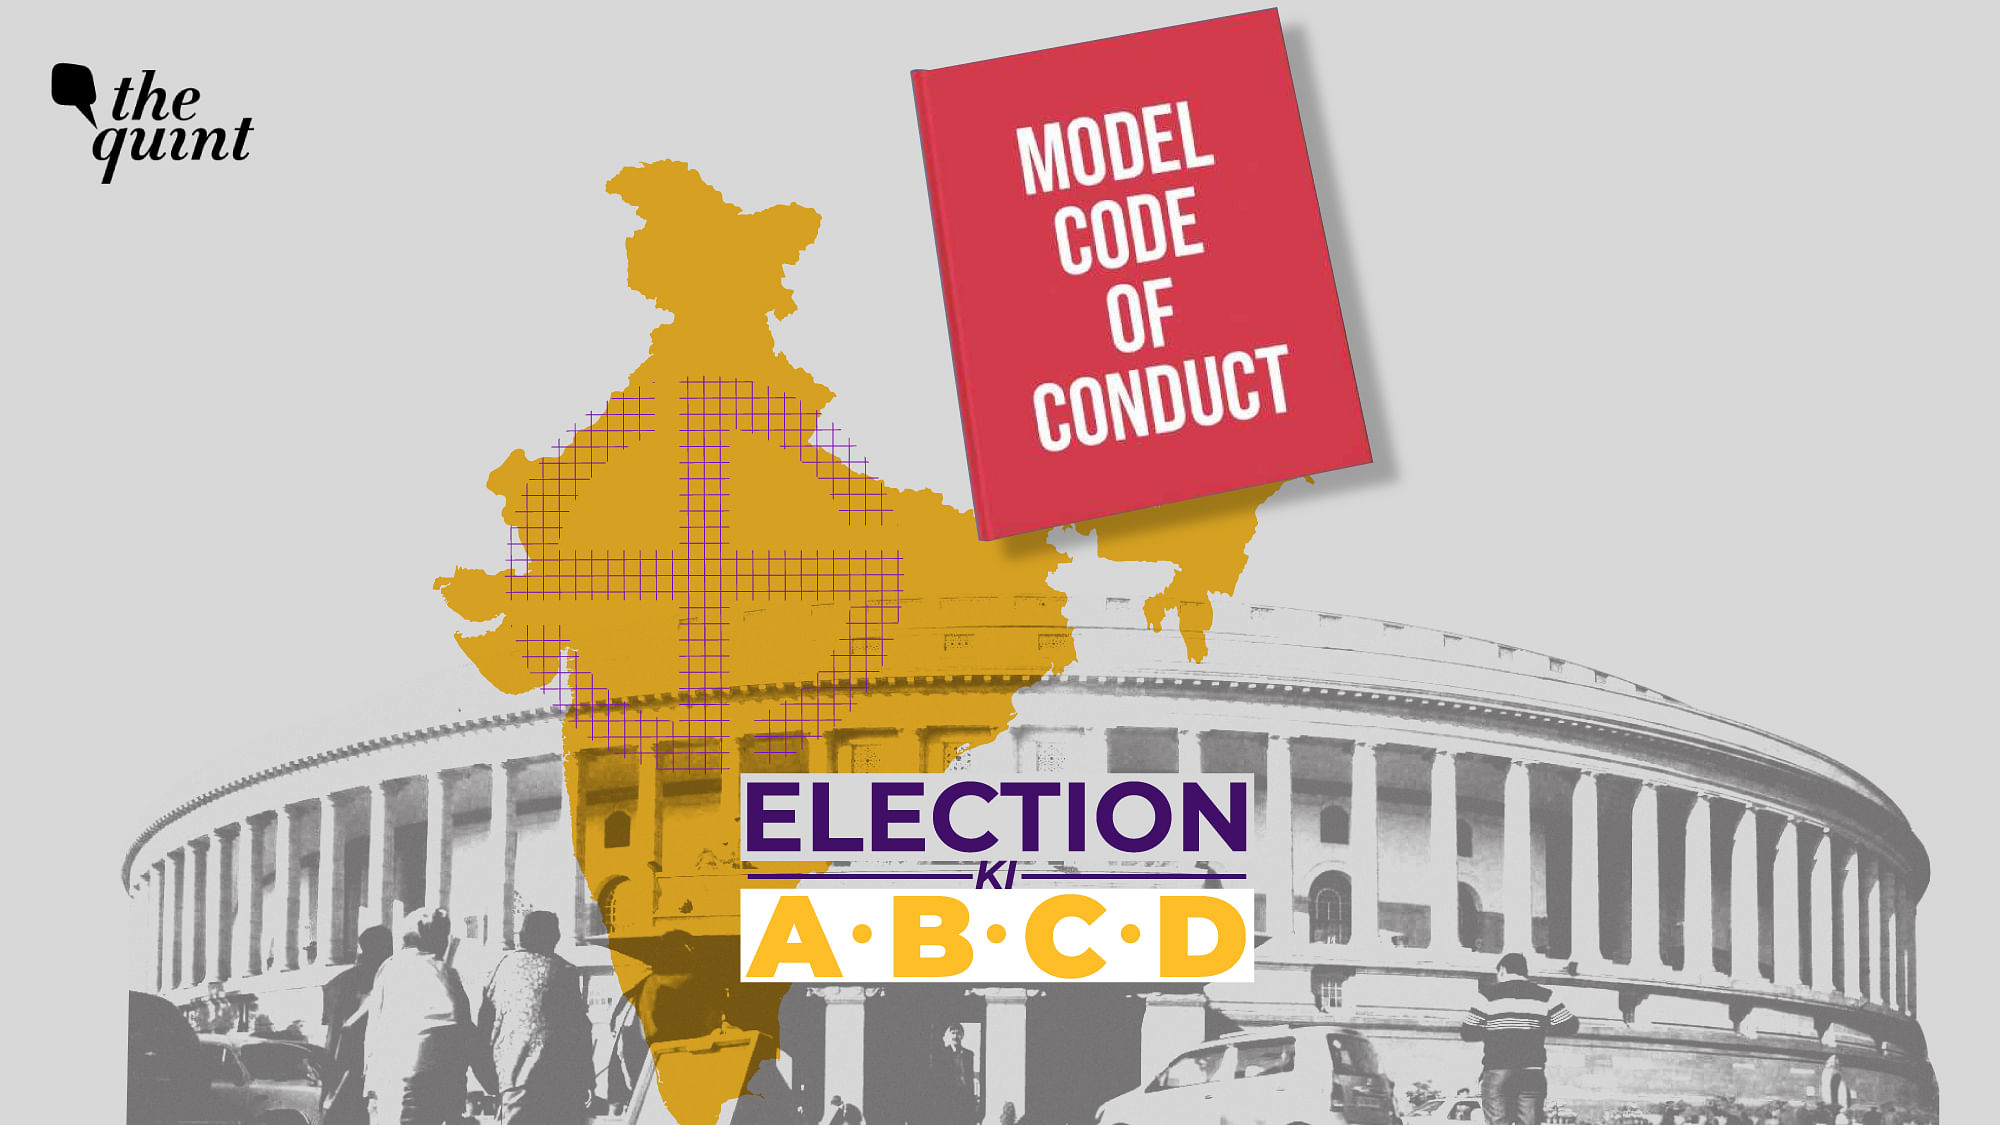 Here’s all you need to know about the Model Code of Conduct ahead of the 2019 Lok Sabha elections.